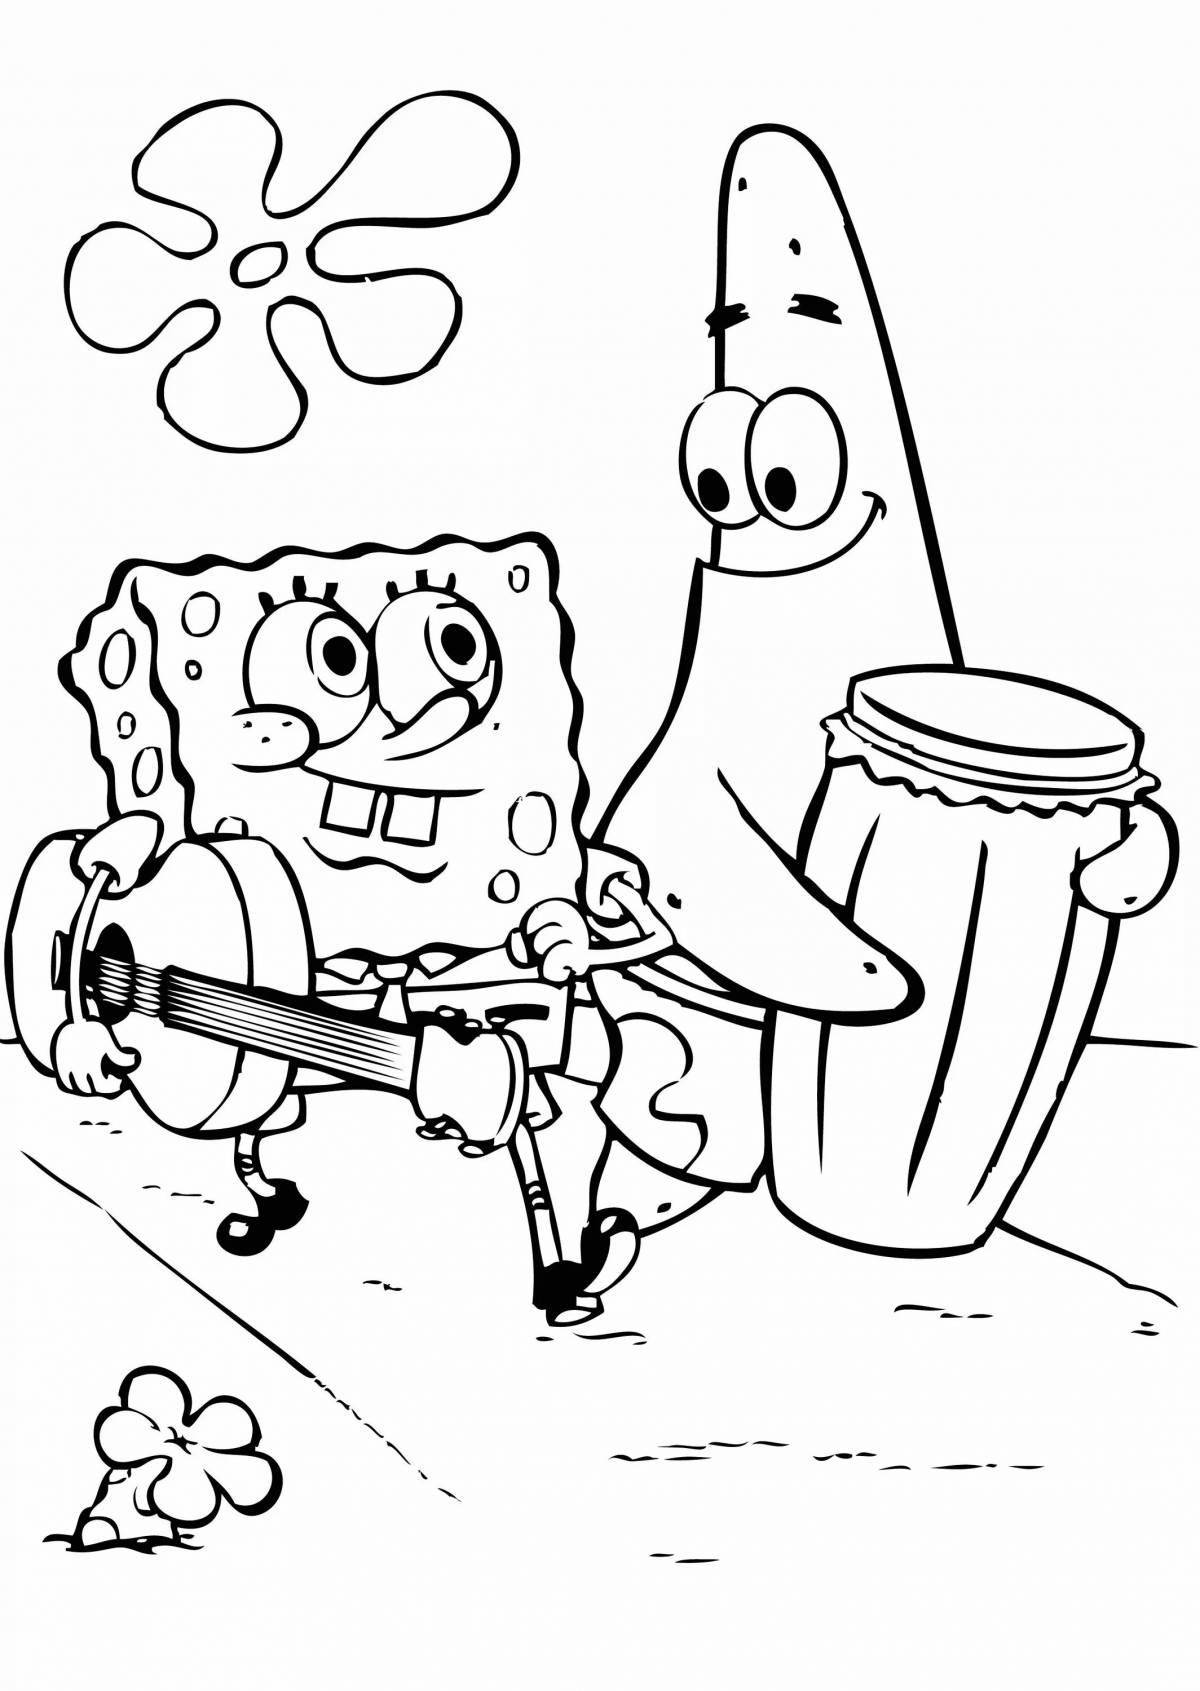 Color-frenzy coloring page spongebob for kids